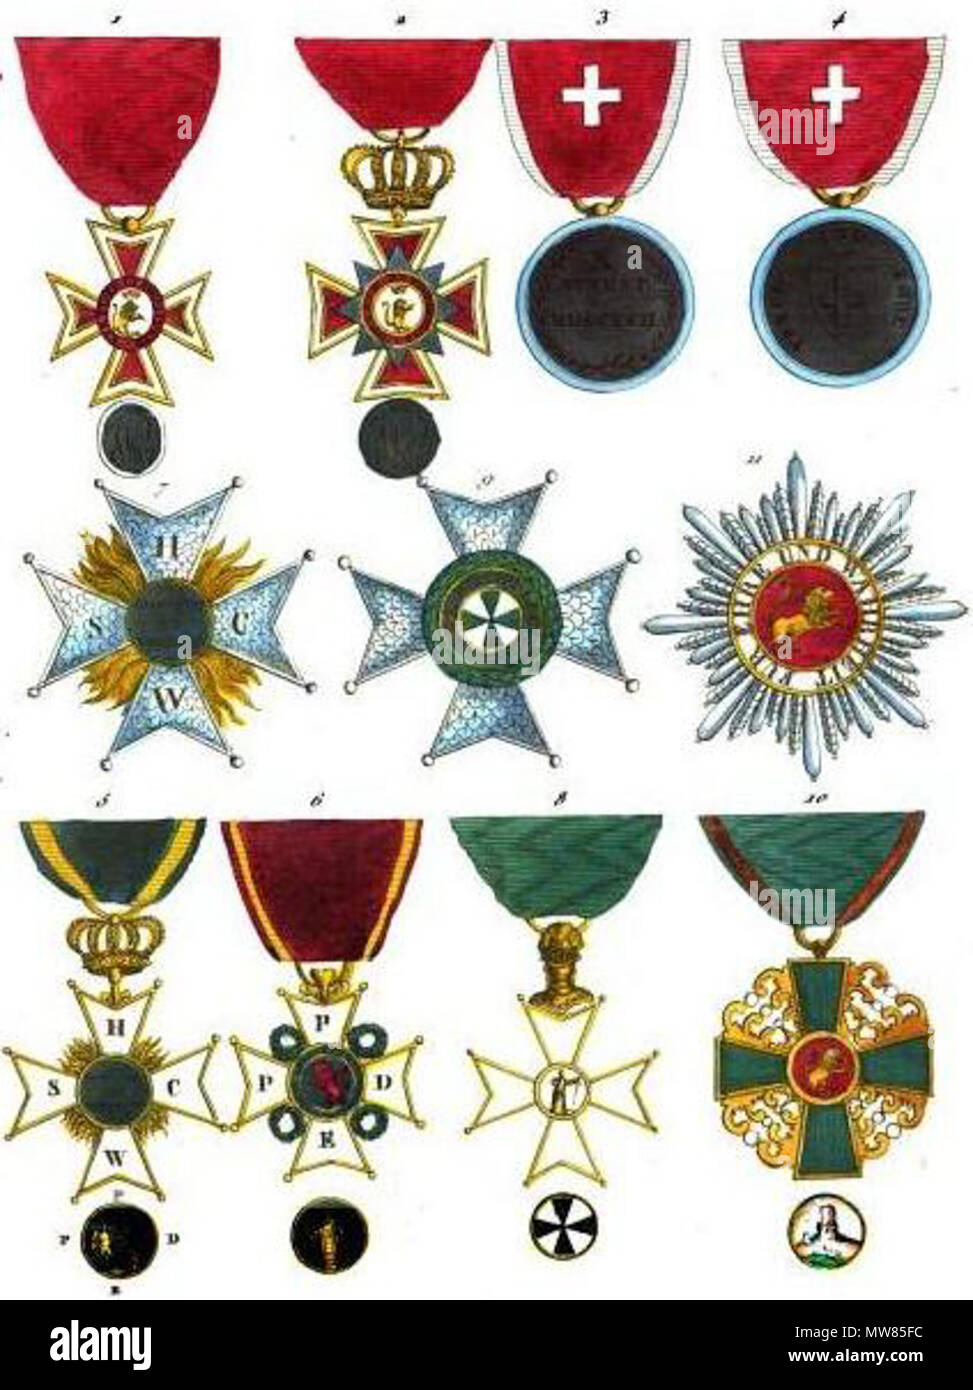 .  Français : Collection historique des ordres de chevalerie civils et militaires... English: Collection of historical orders of chivalry civil and military...: 1. Order of Golden Lion, grand cross badge since 1816 (Hesse-Kassel) 2. Order of Golden Lion, commander badge since 1816 (Hesse-Kassel) 4. Médaille du 10 août 1792, reverse (Switzerland) 4. Médaille du 10 août 1792, reverse (Switzerland) 5. Order of the Four Emperors, badge (Limburg) 6. Order of St Philip of the Lion (Limburg) 7. Order of the Four Emperors, star (Limburg) 8. Order of Saint Joachim, badge (Saxony-Coburg-Saalfeld) 9. Ord Stock Photo